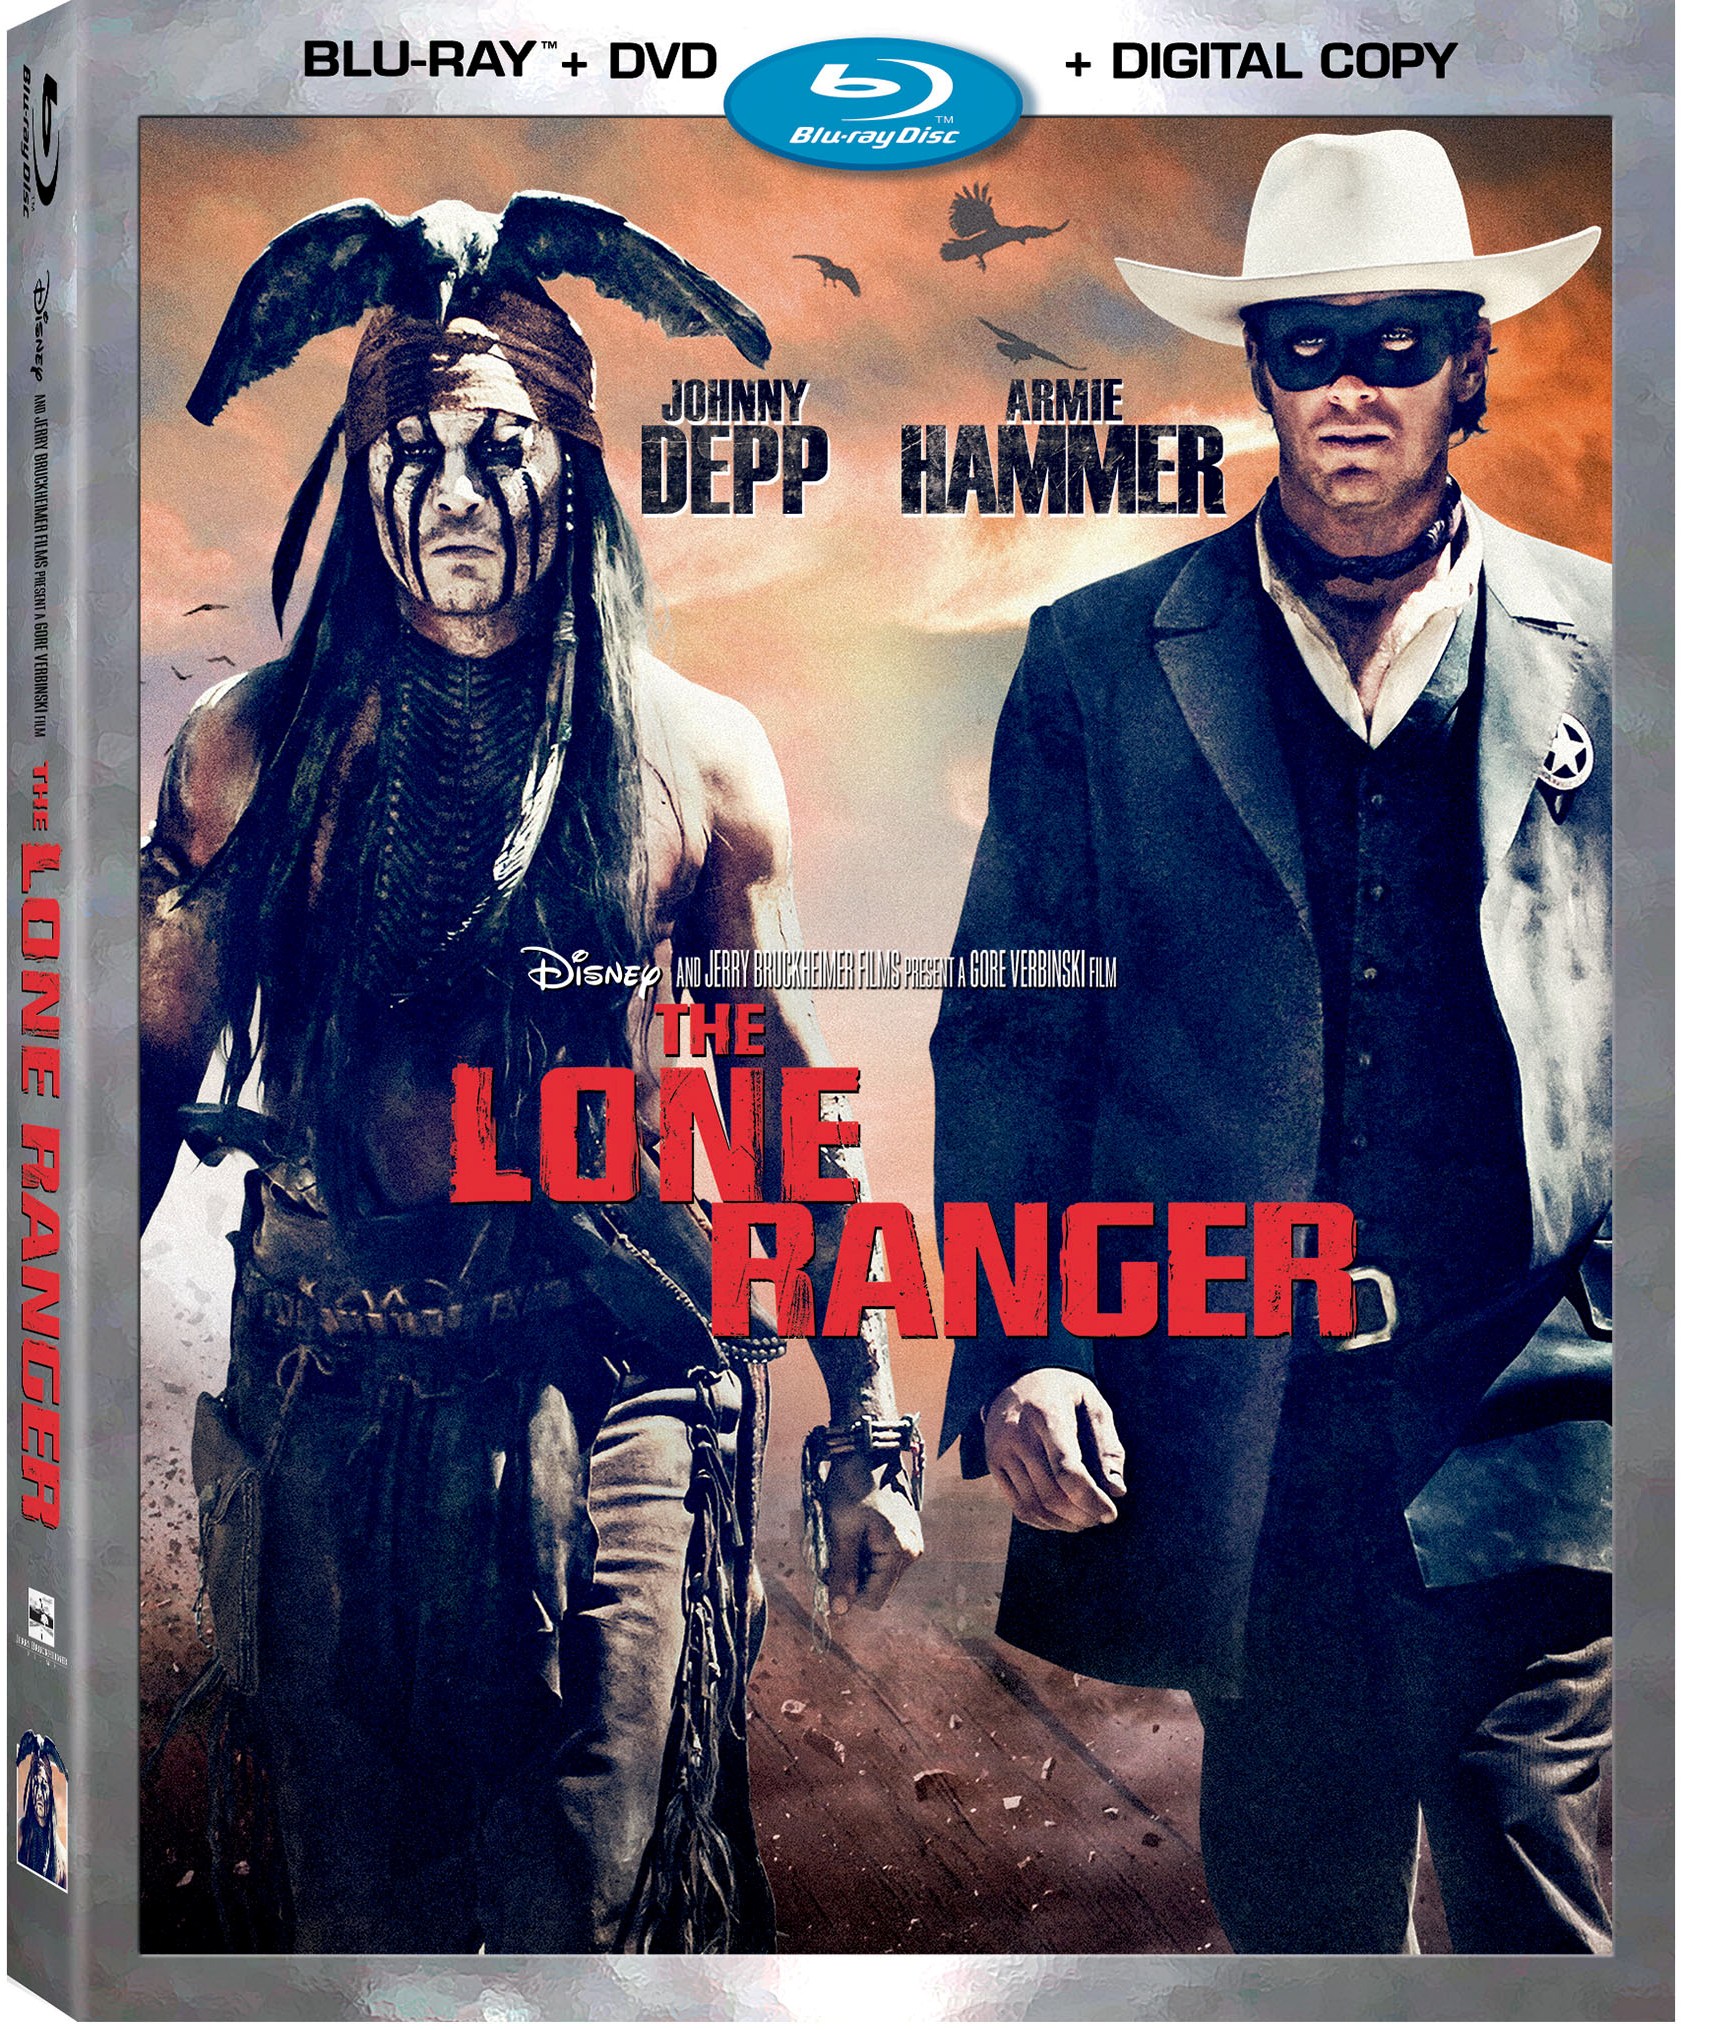 The Lone Ranger coming to Blu-ray/DVD December 17th